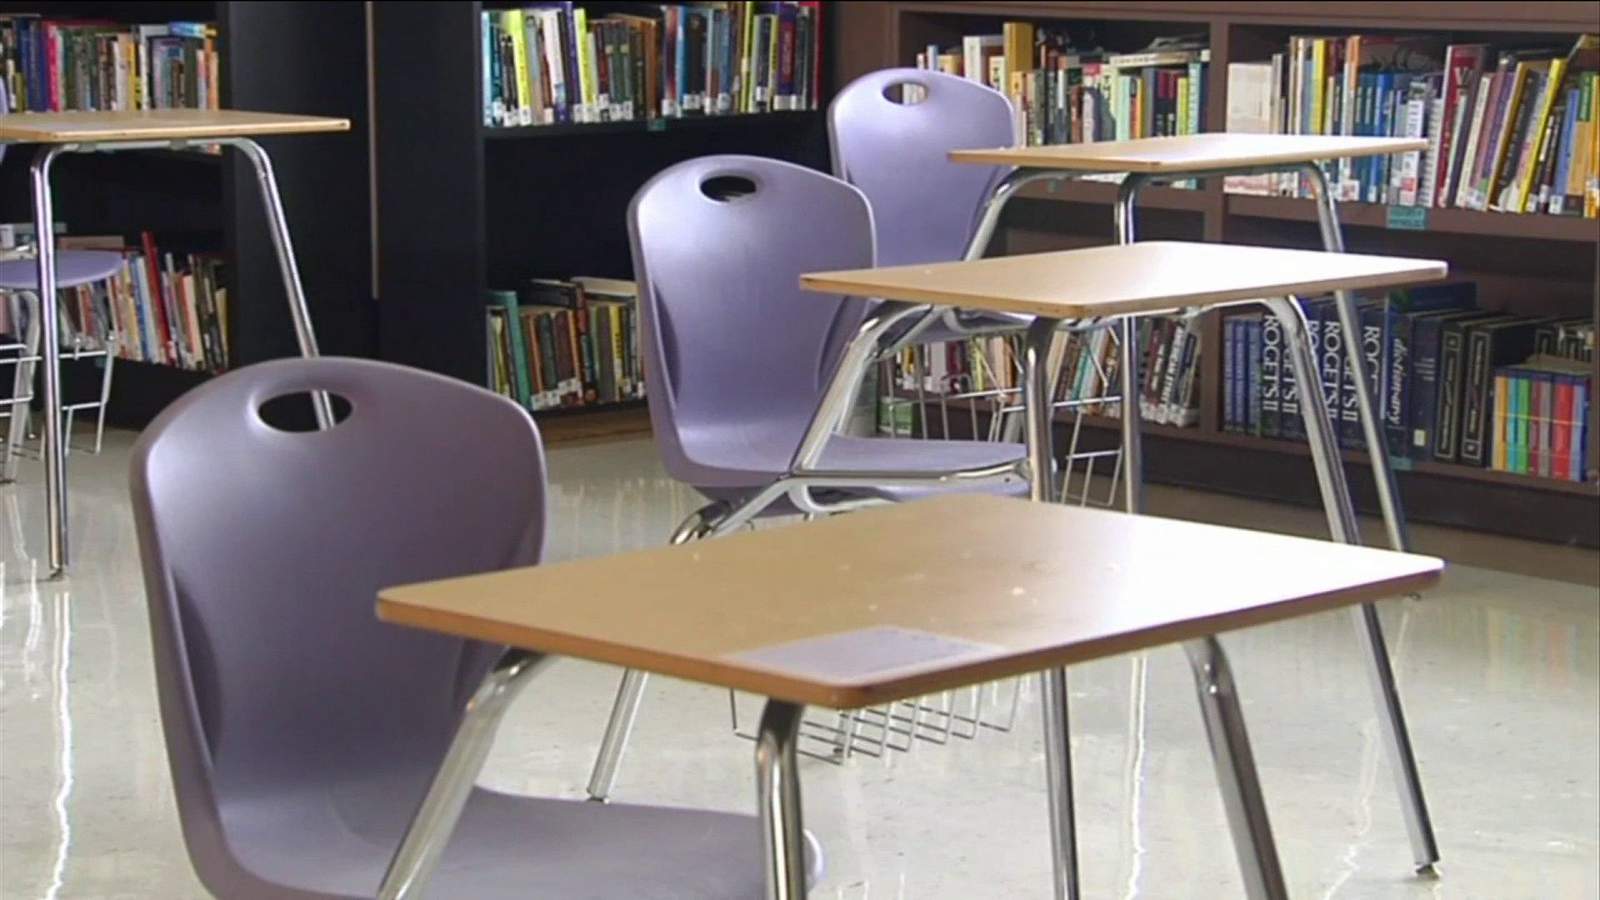 School districts helping students get back on track during pandemic slide